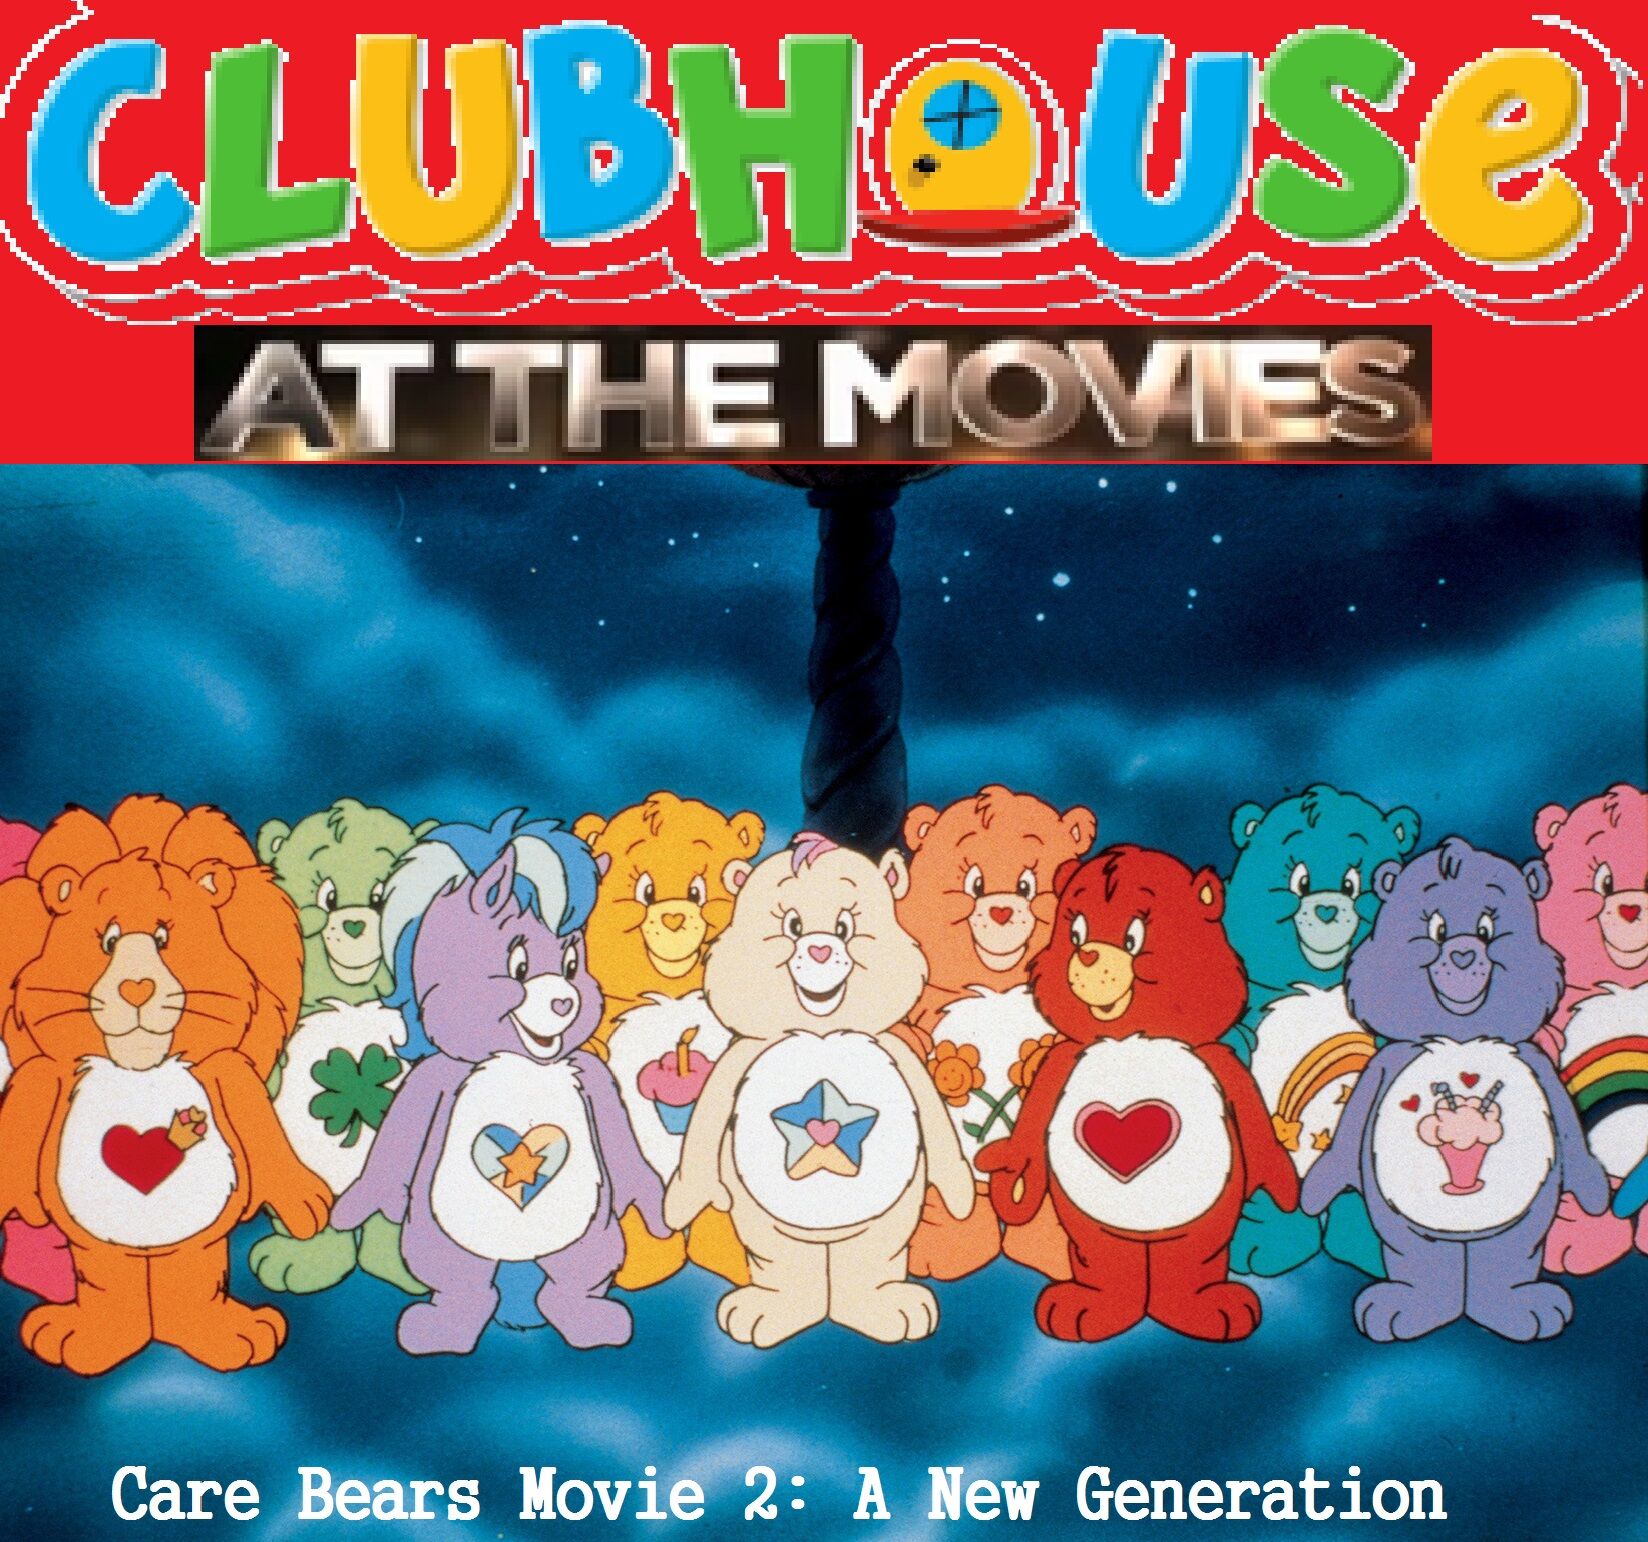 Clubhouse At The Movies - Gold Diggers: The Secret of Bear